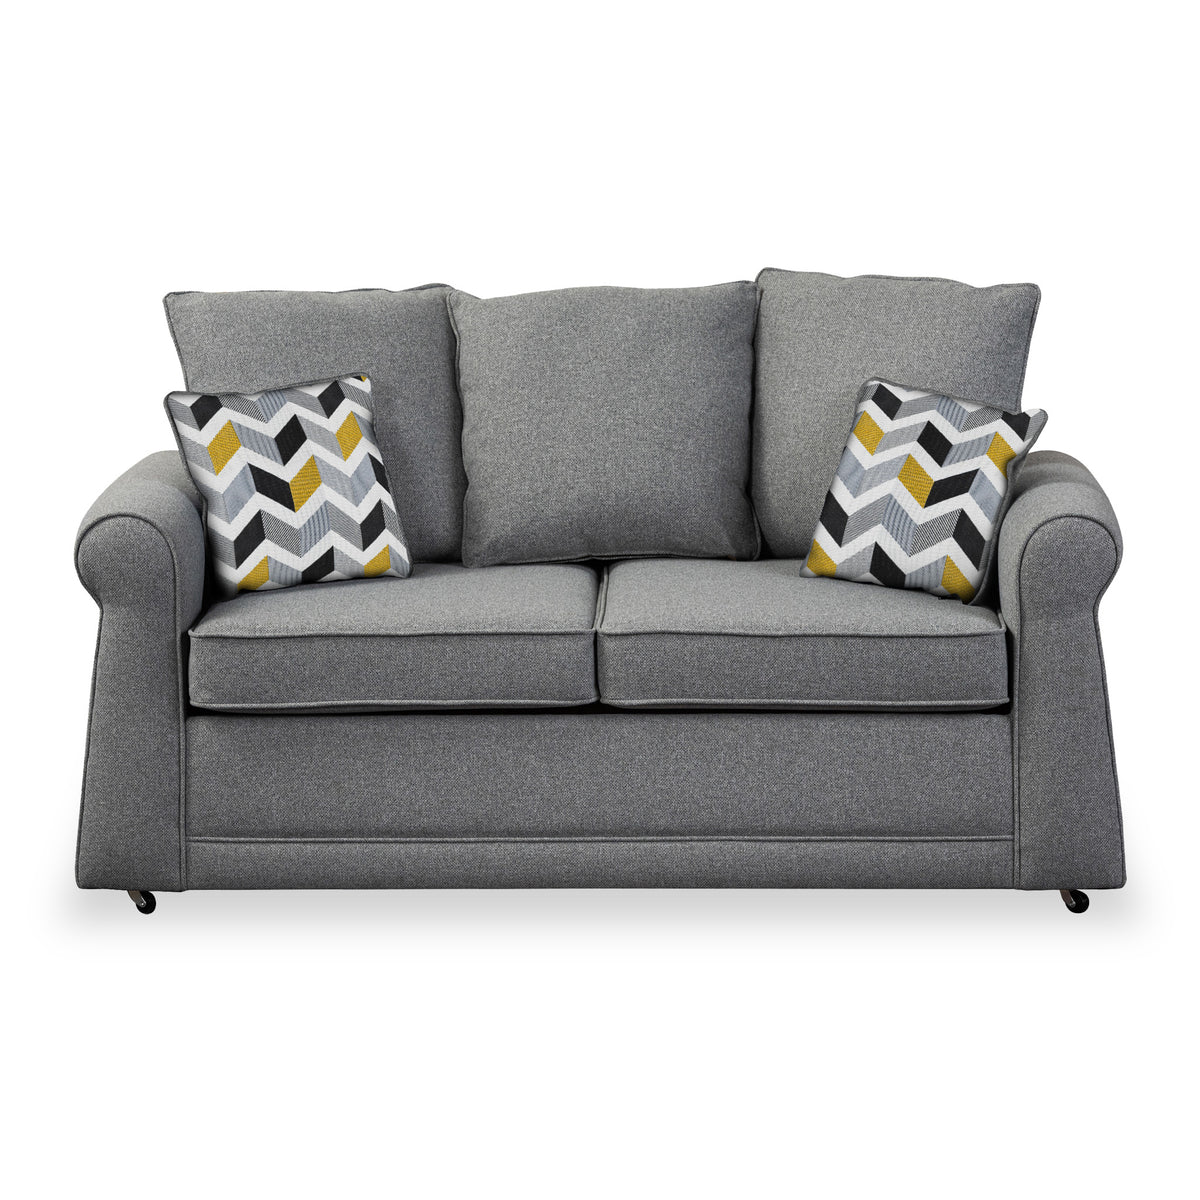 Broughton Silver Faux Linen 2 Seater Sofabed with Mustard Scatter Cushions from Roseland Furniture